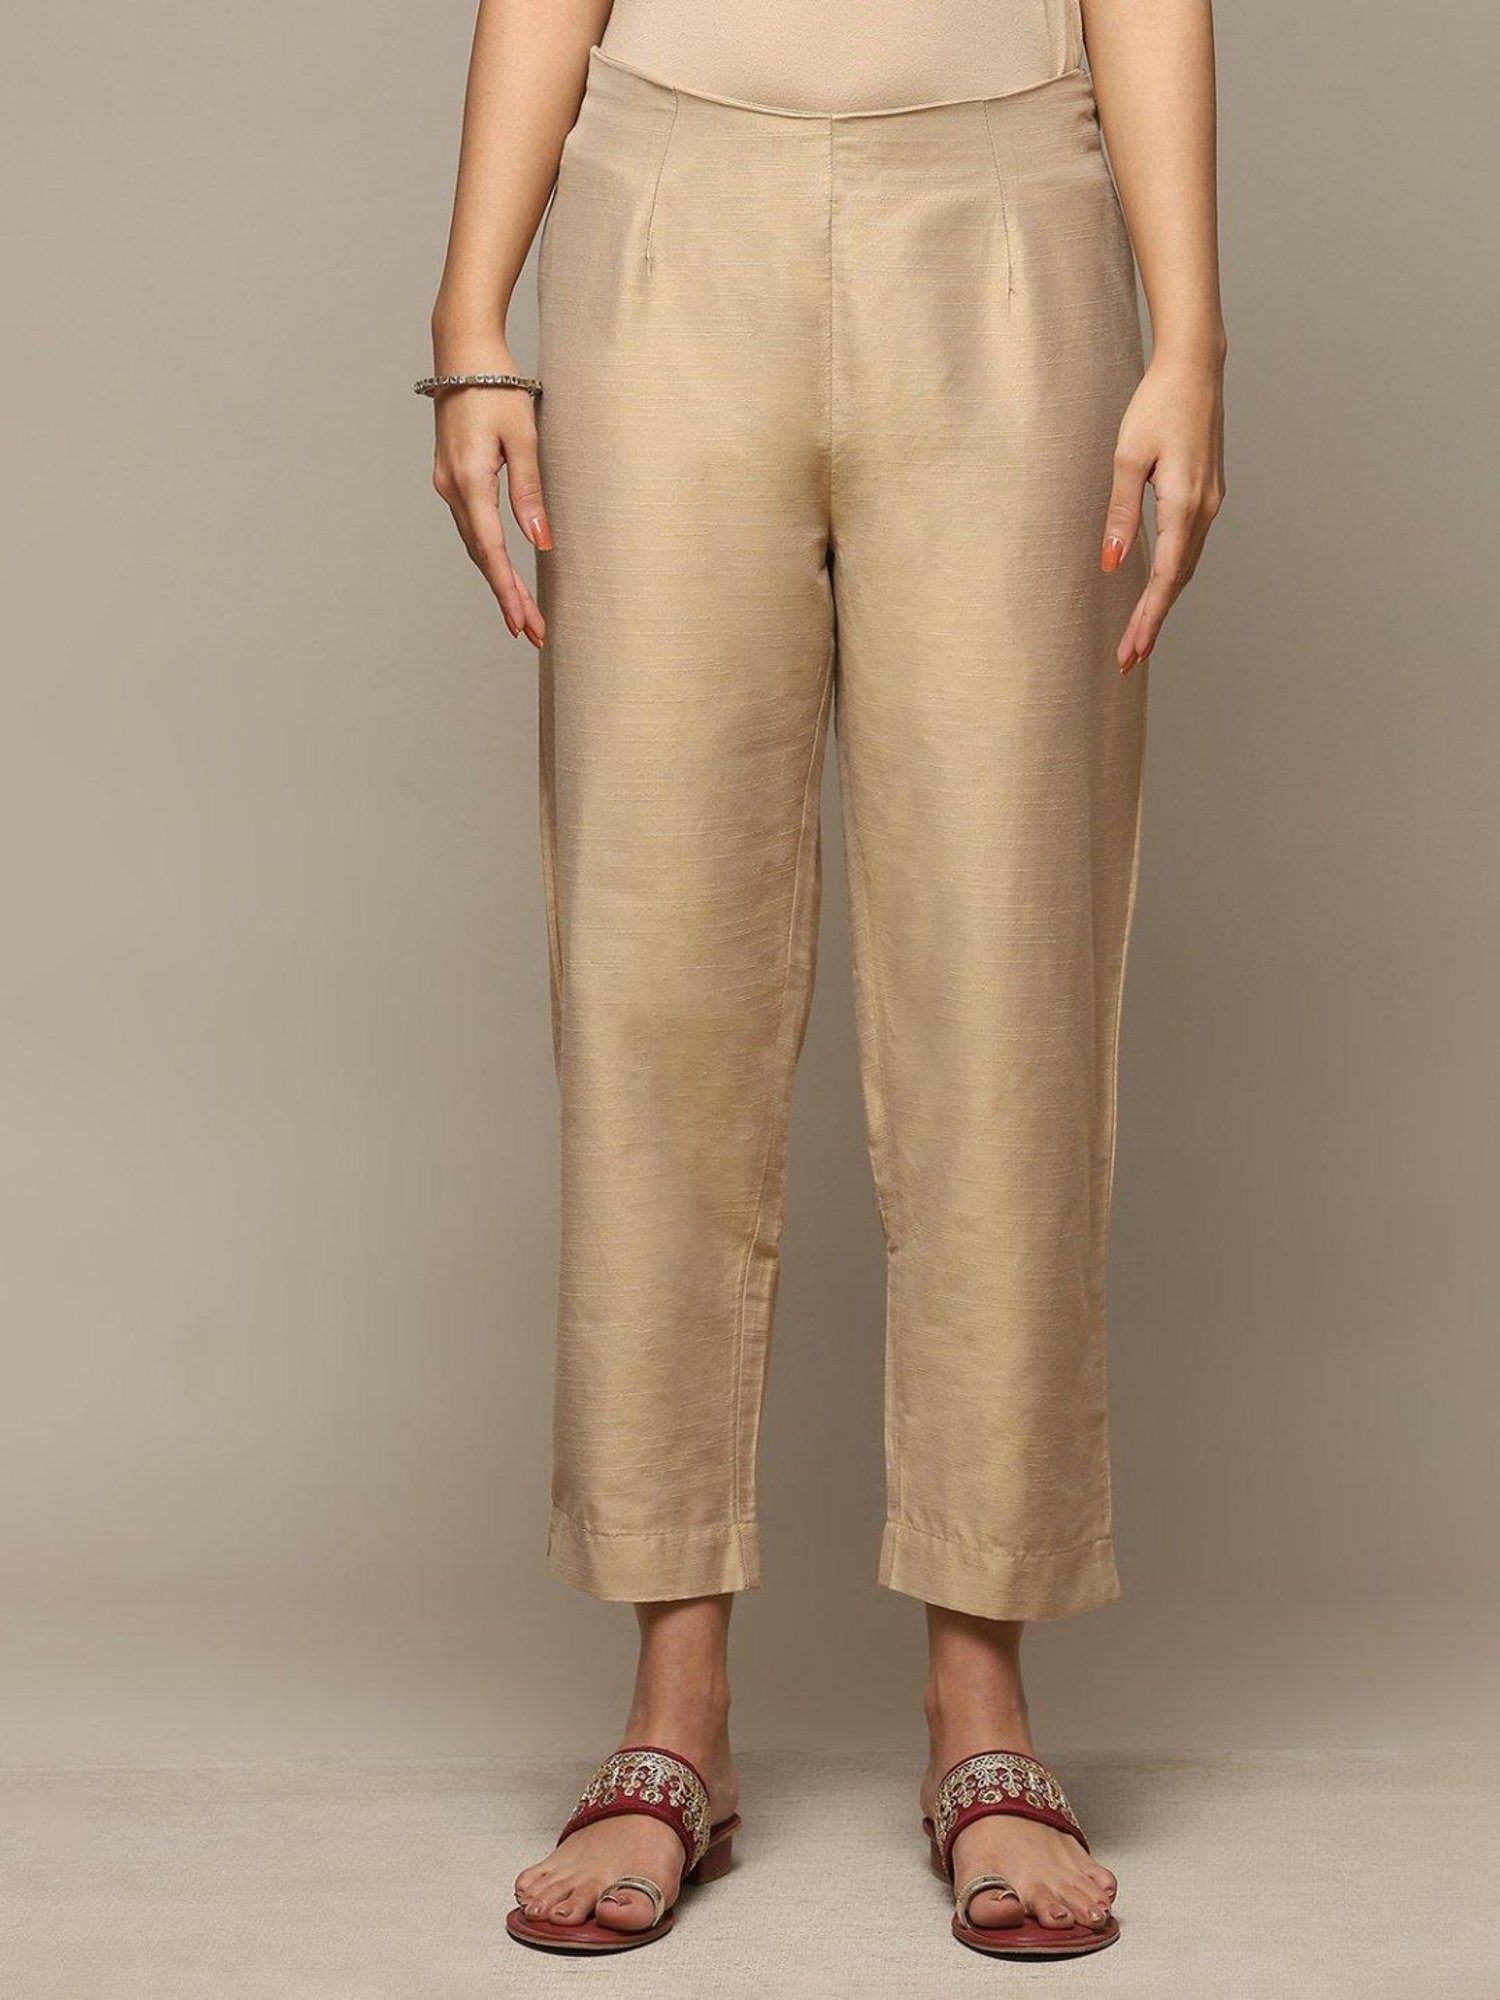 Buy Online Beige And Gold Poly Metallic Cotton Pants for Women  Girls at  Best Prices in Biba India